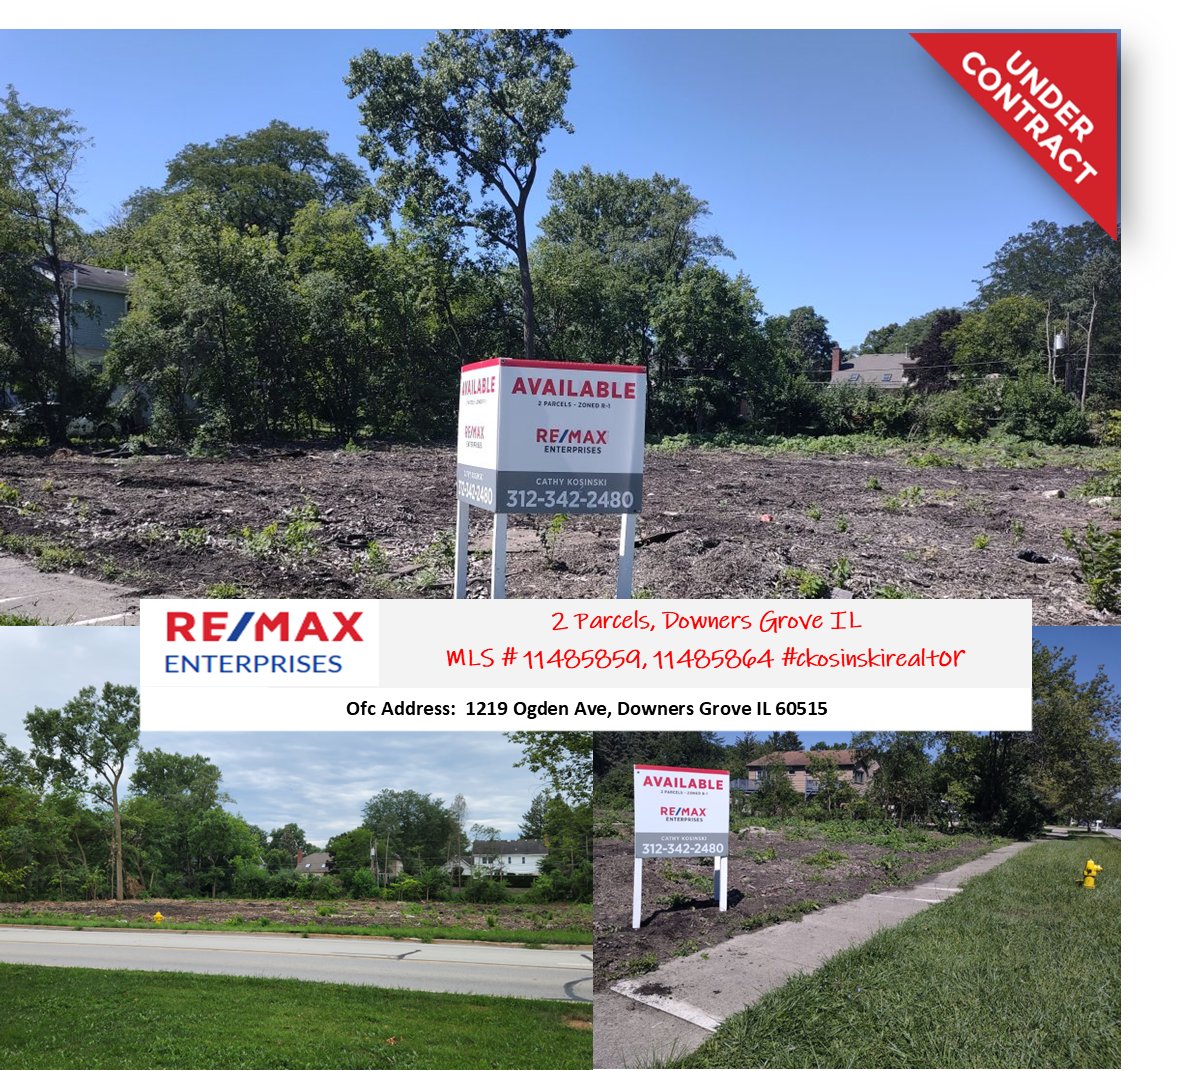 #undercontract Rarely available 2 vacant parcels in #DownersGroveIL!   cathy15.com    Call/Text 312-376-4247 OR email cathykosinskisells@gmail.com #realtorlife #ckosinskirealtor #sellmyhouse #ReMaxEnterprises